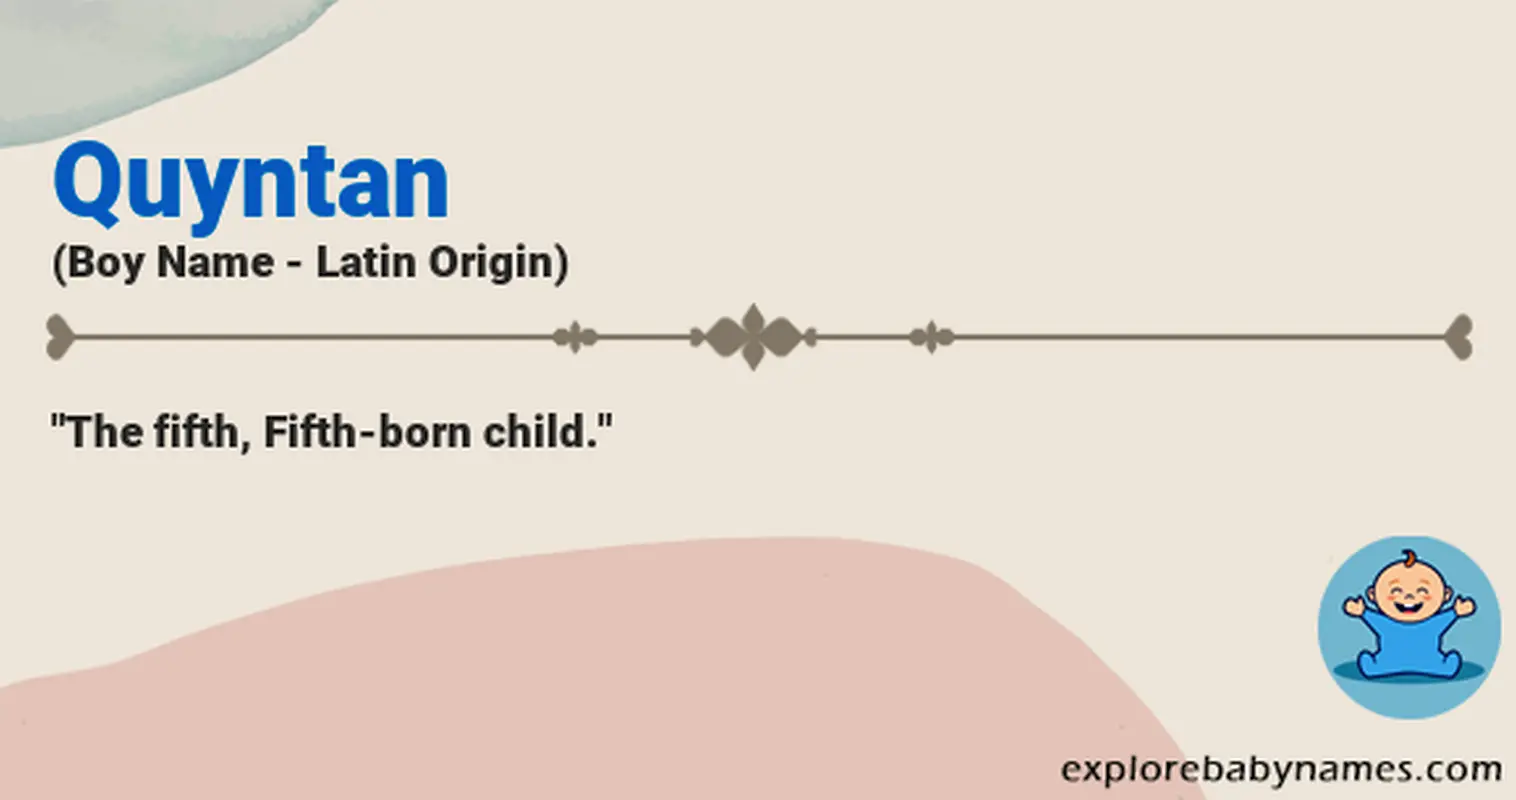 Meaning of Quyntan